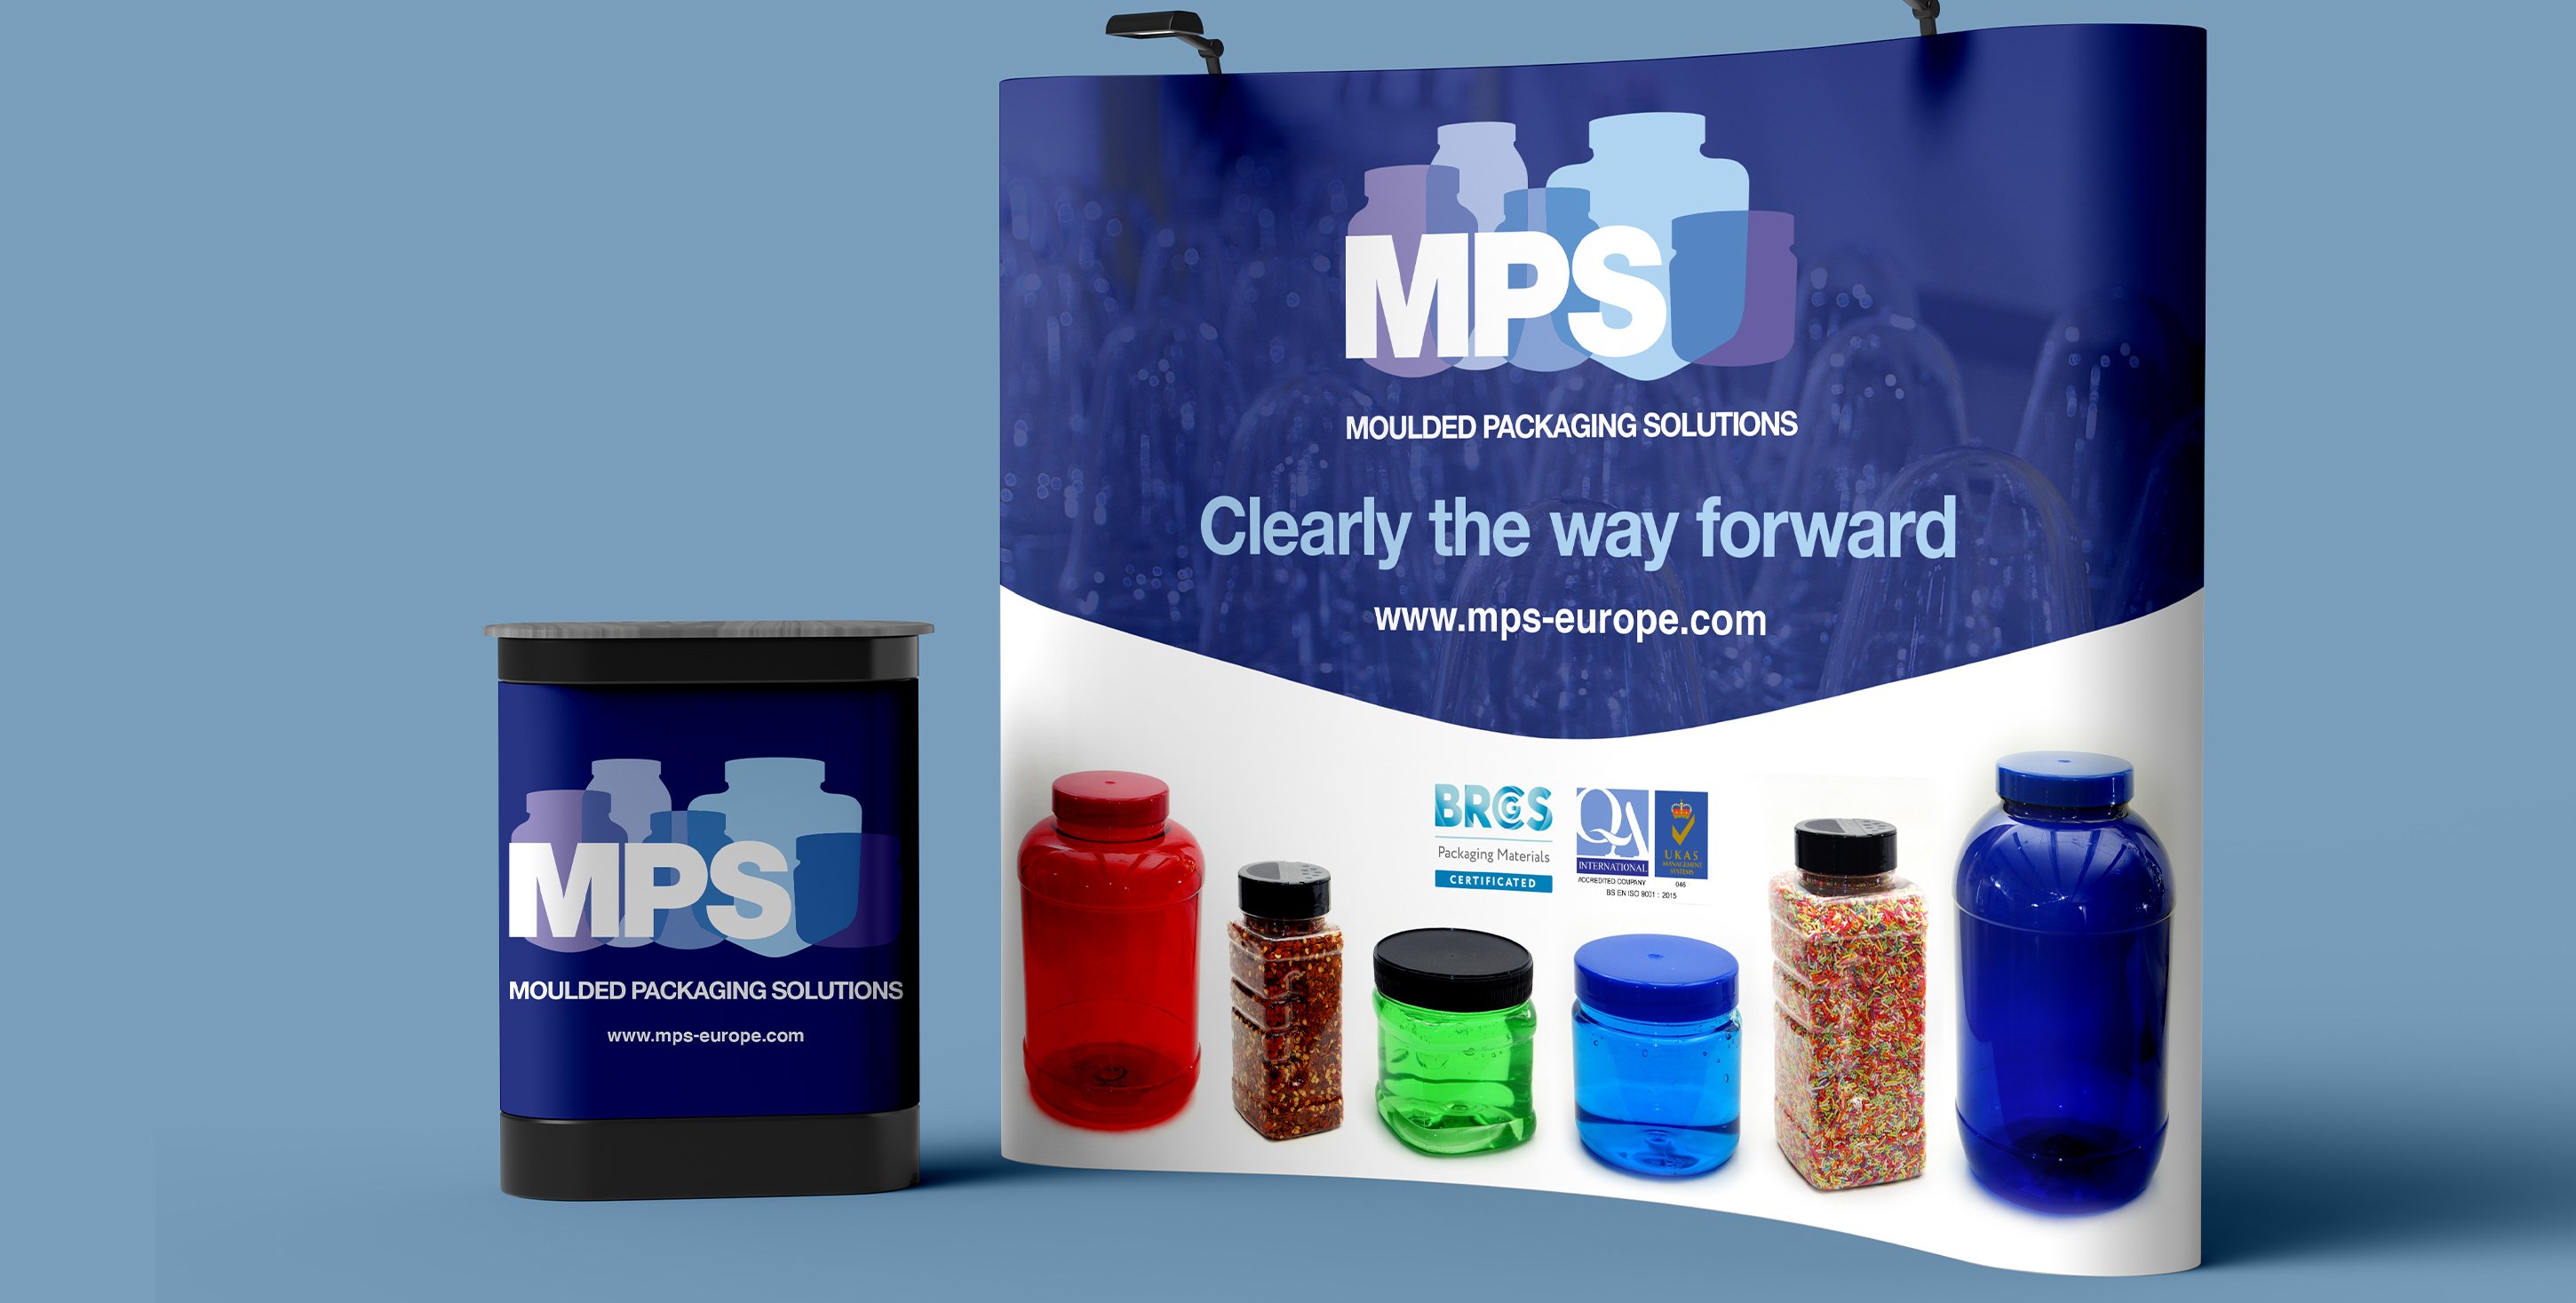 mps-exhibition-stand